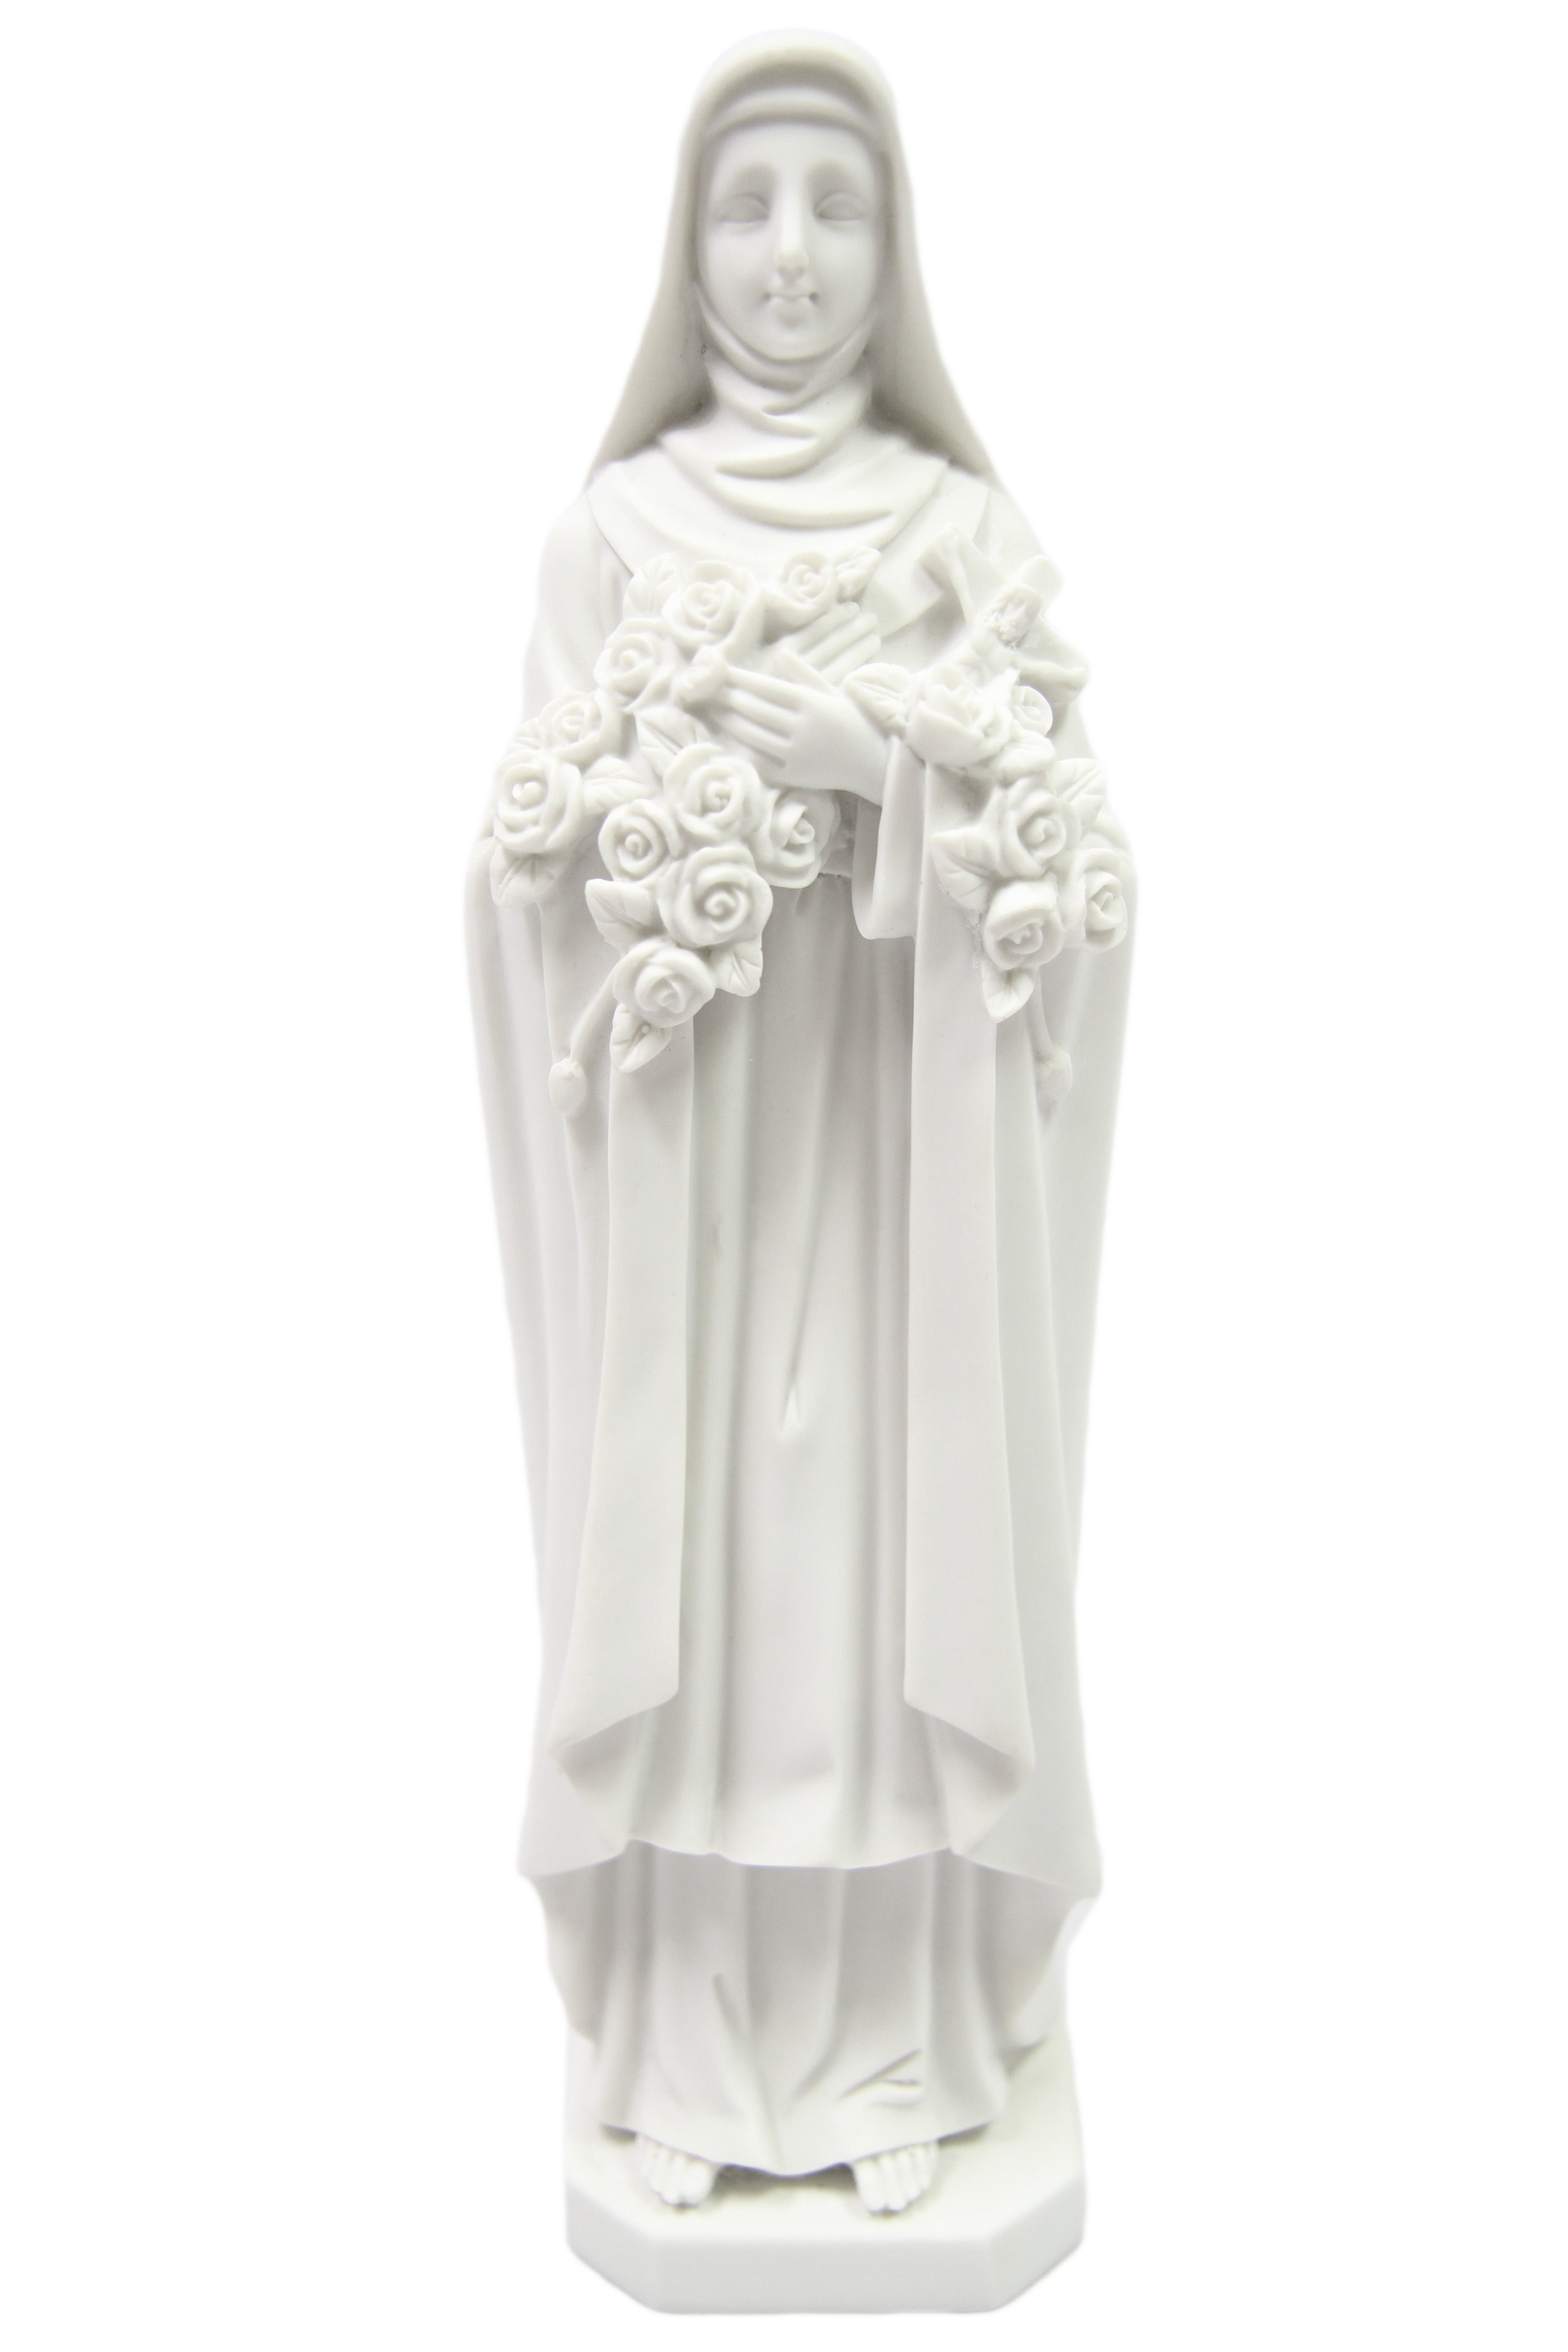 11 Inch Saint Therese The Little Flower Catholic Statue Figurine Vittoria Collection